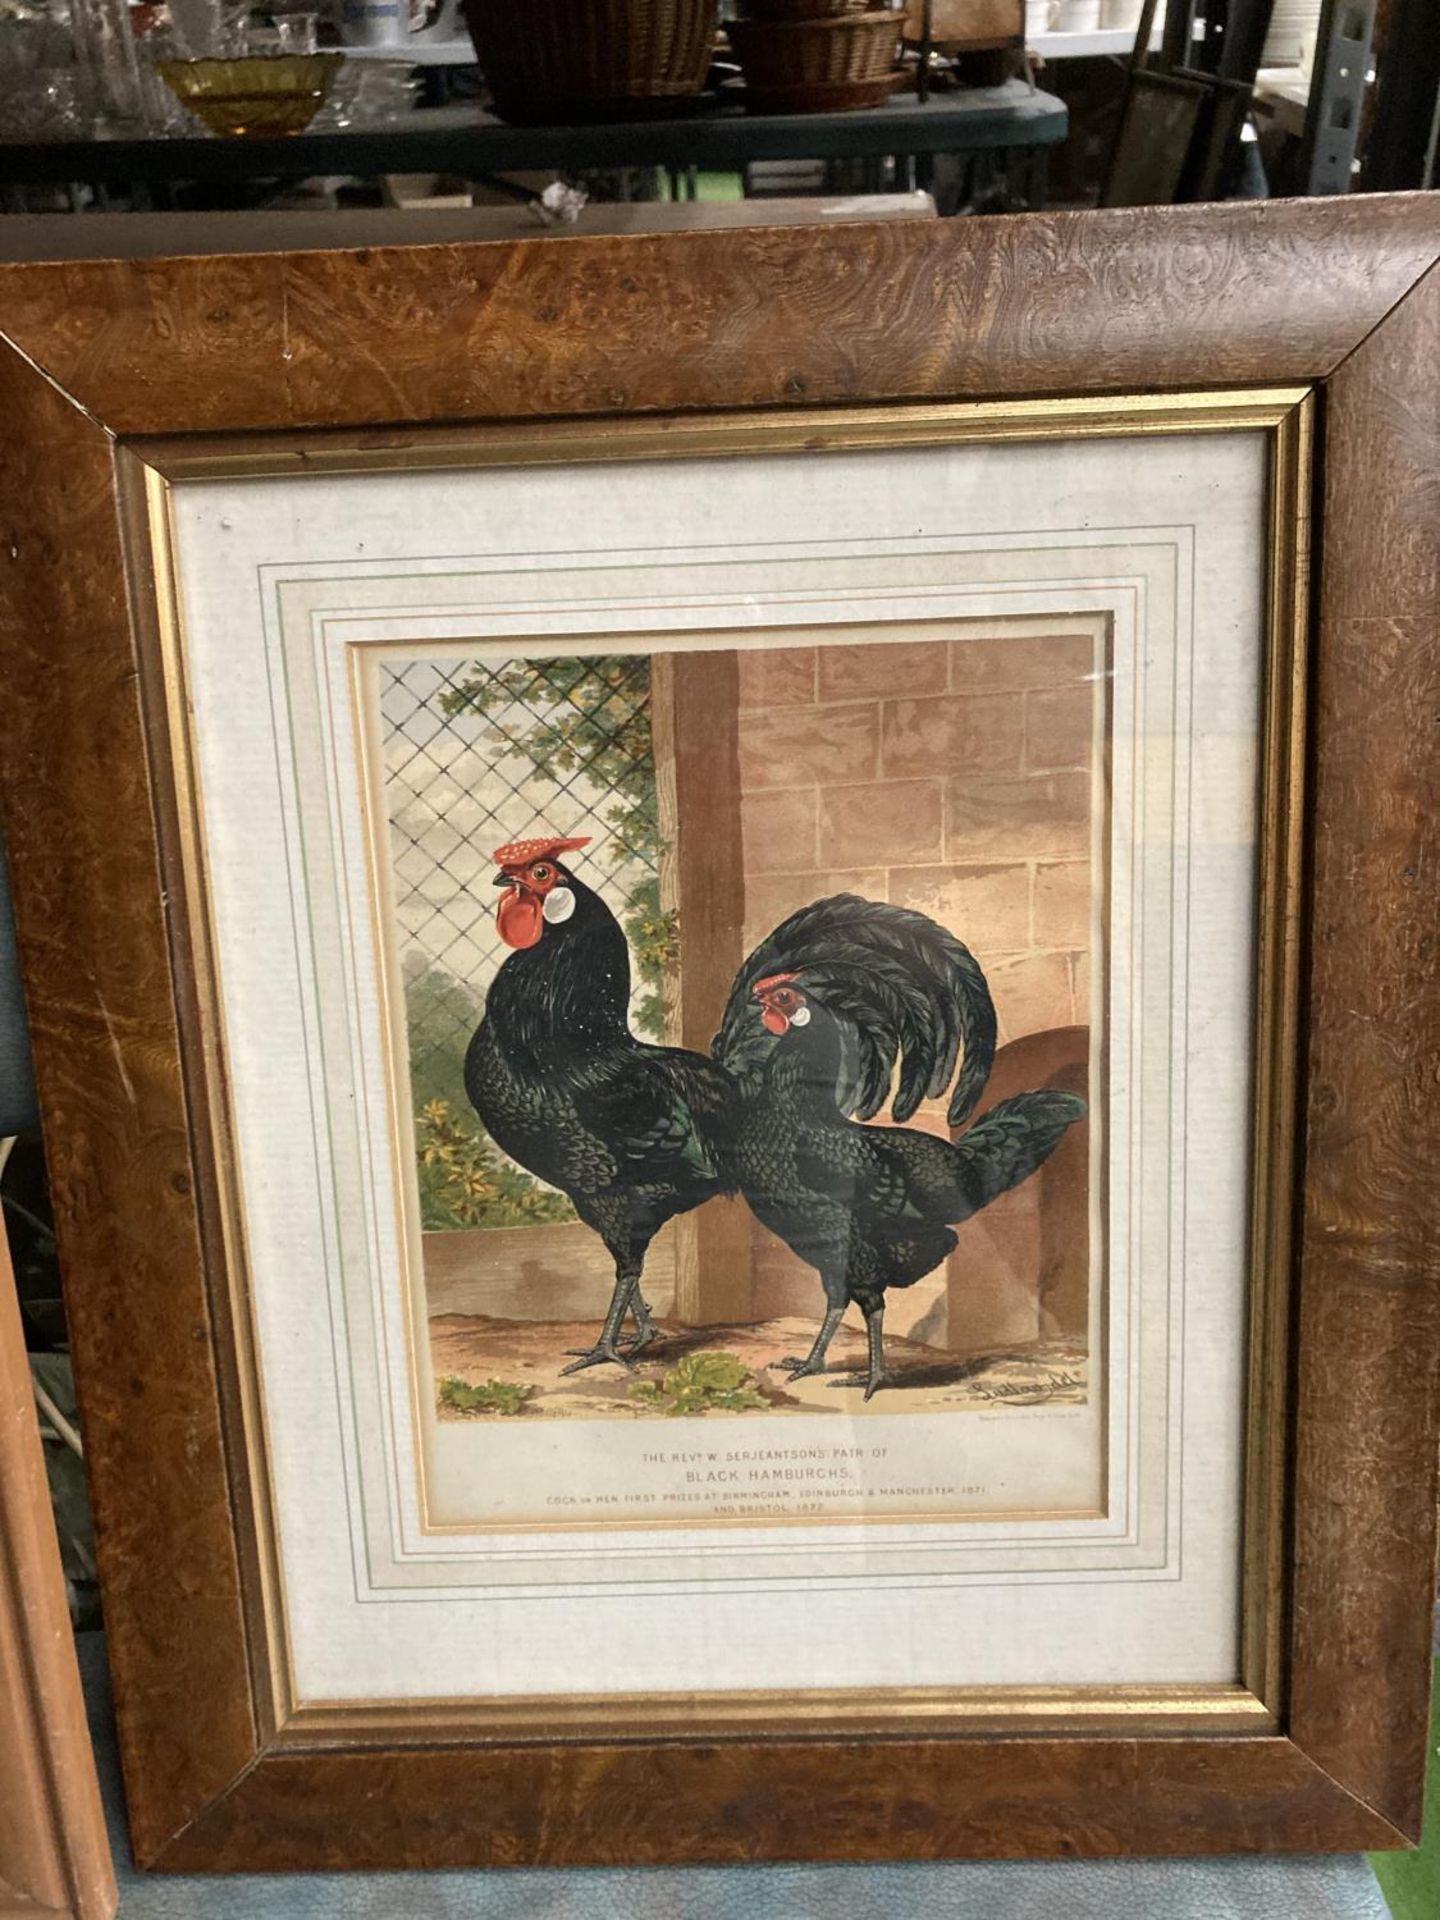 A CHICKEN BLACKBOARD AND A VICTORIAN PRINT OF A PAIR OF BLACK HAMBURGS - Image 2 of 4